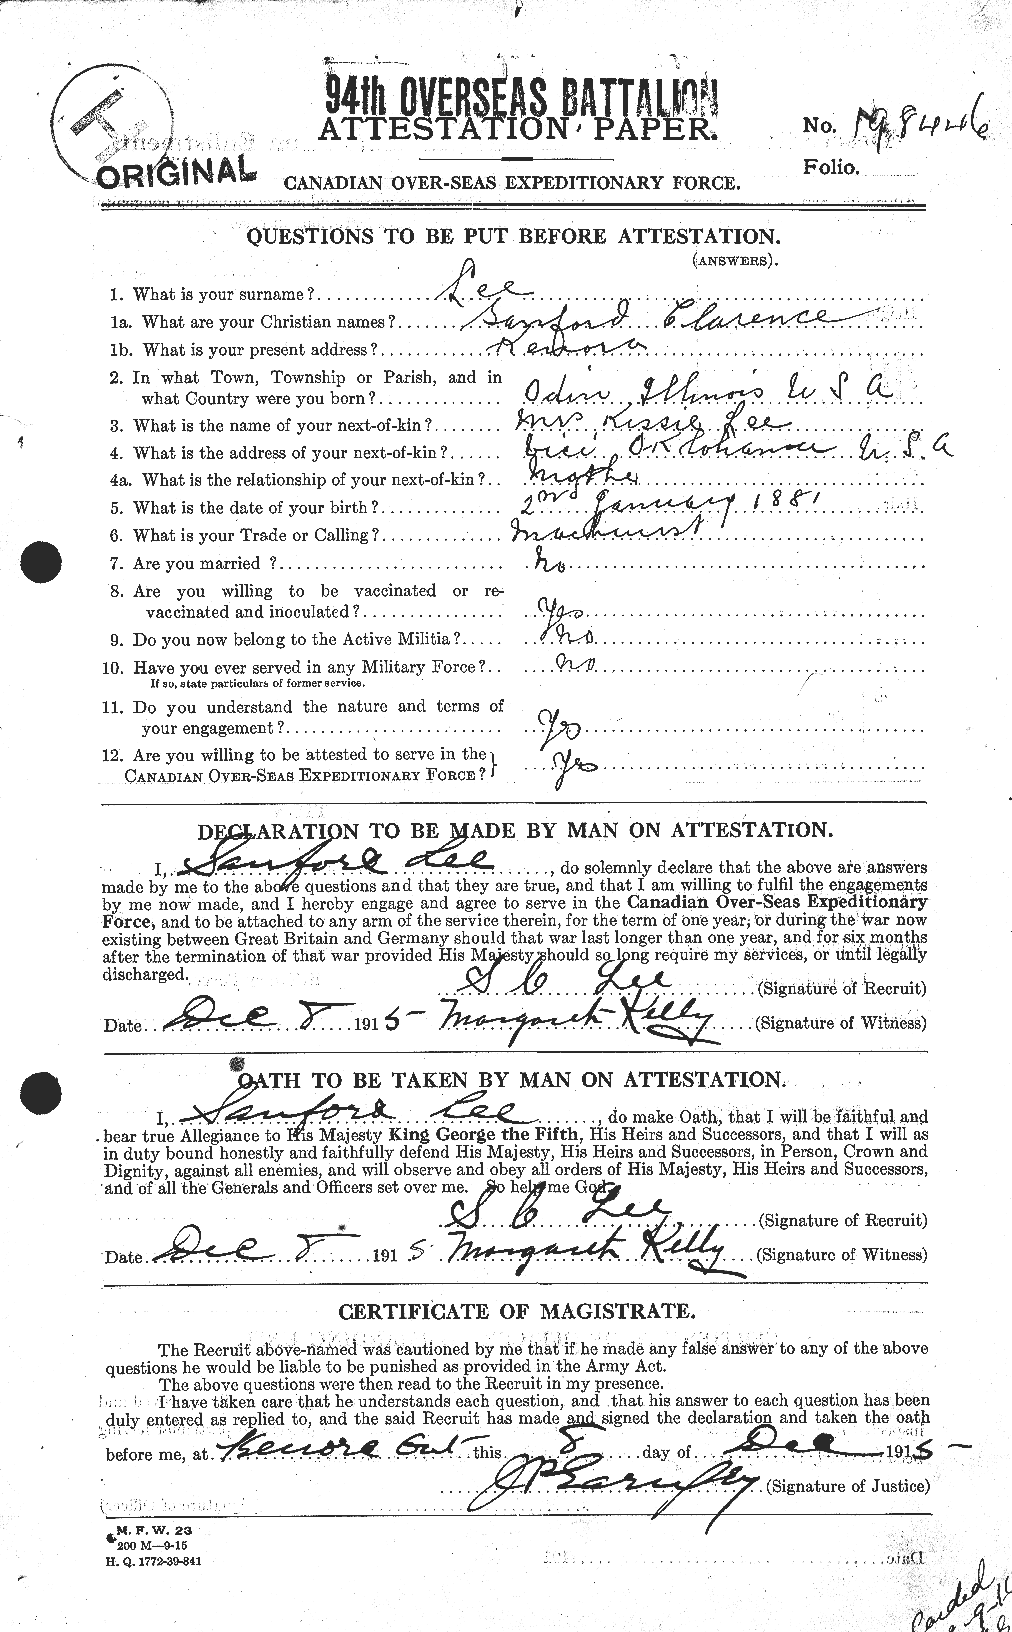 Personnel Records of the First World War - CEF 459028a